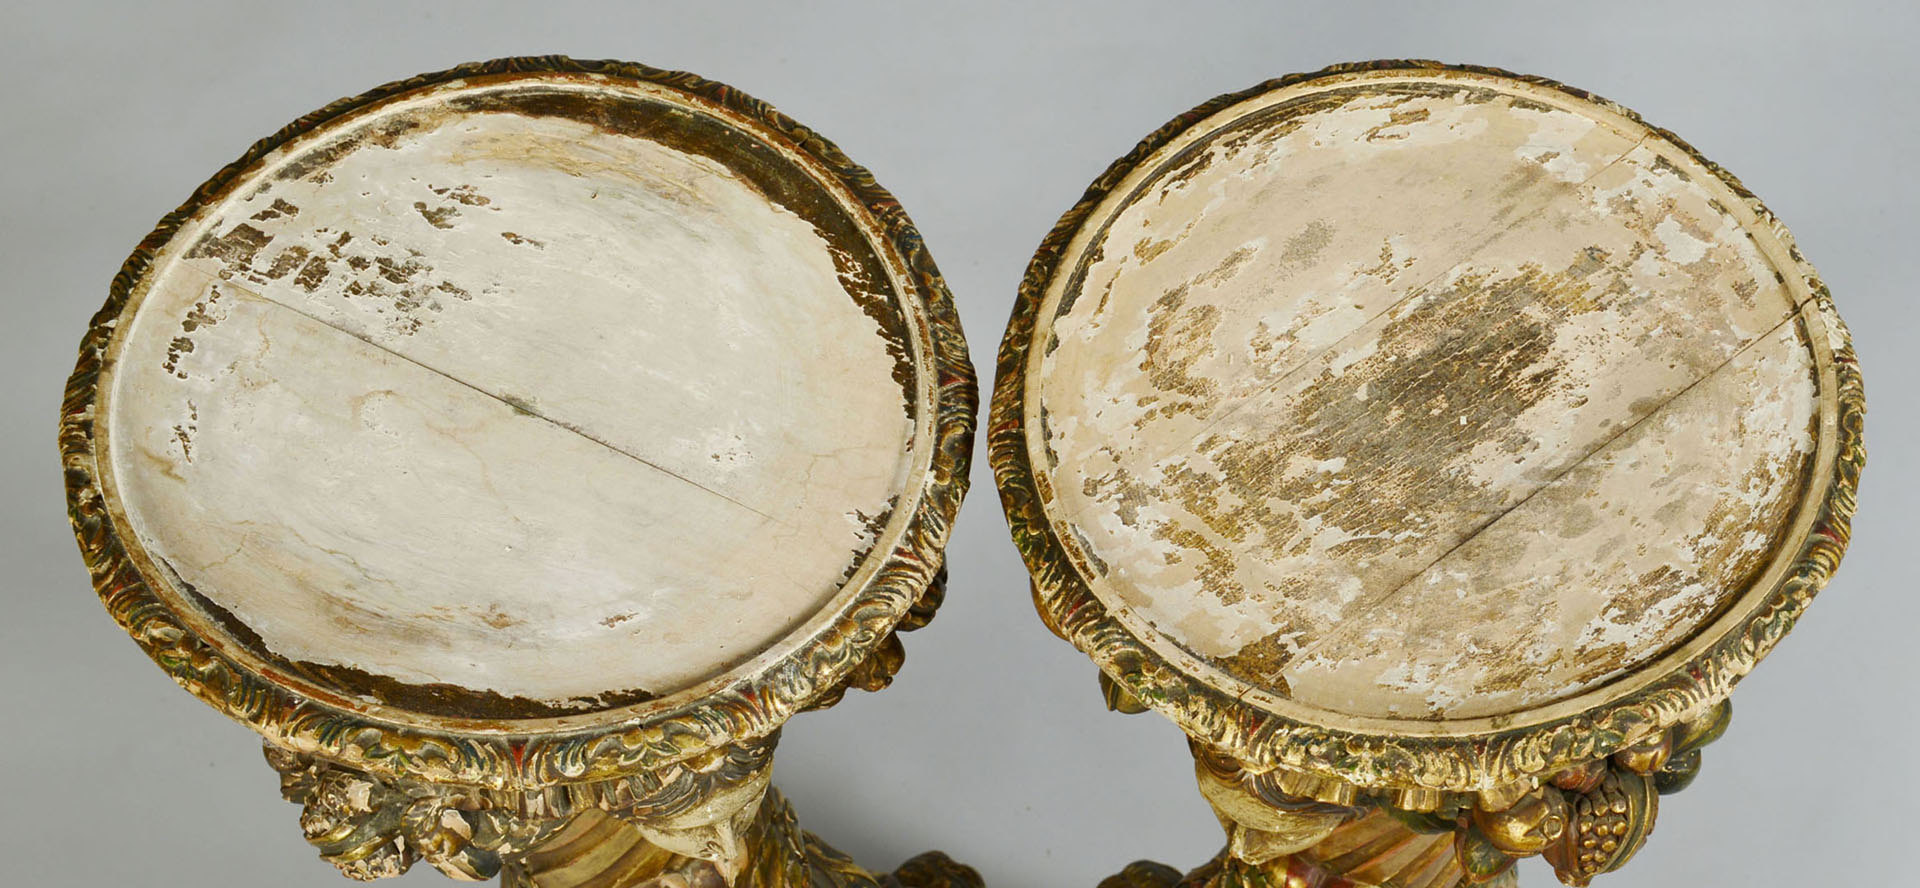 Lot 54: Baroque style carved and polychromed pedestals